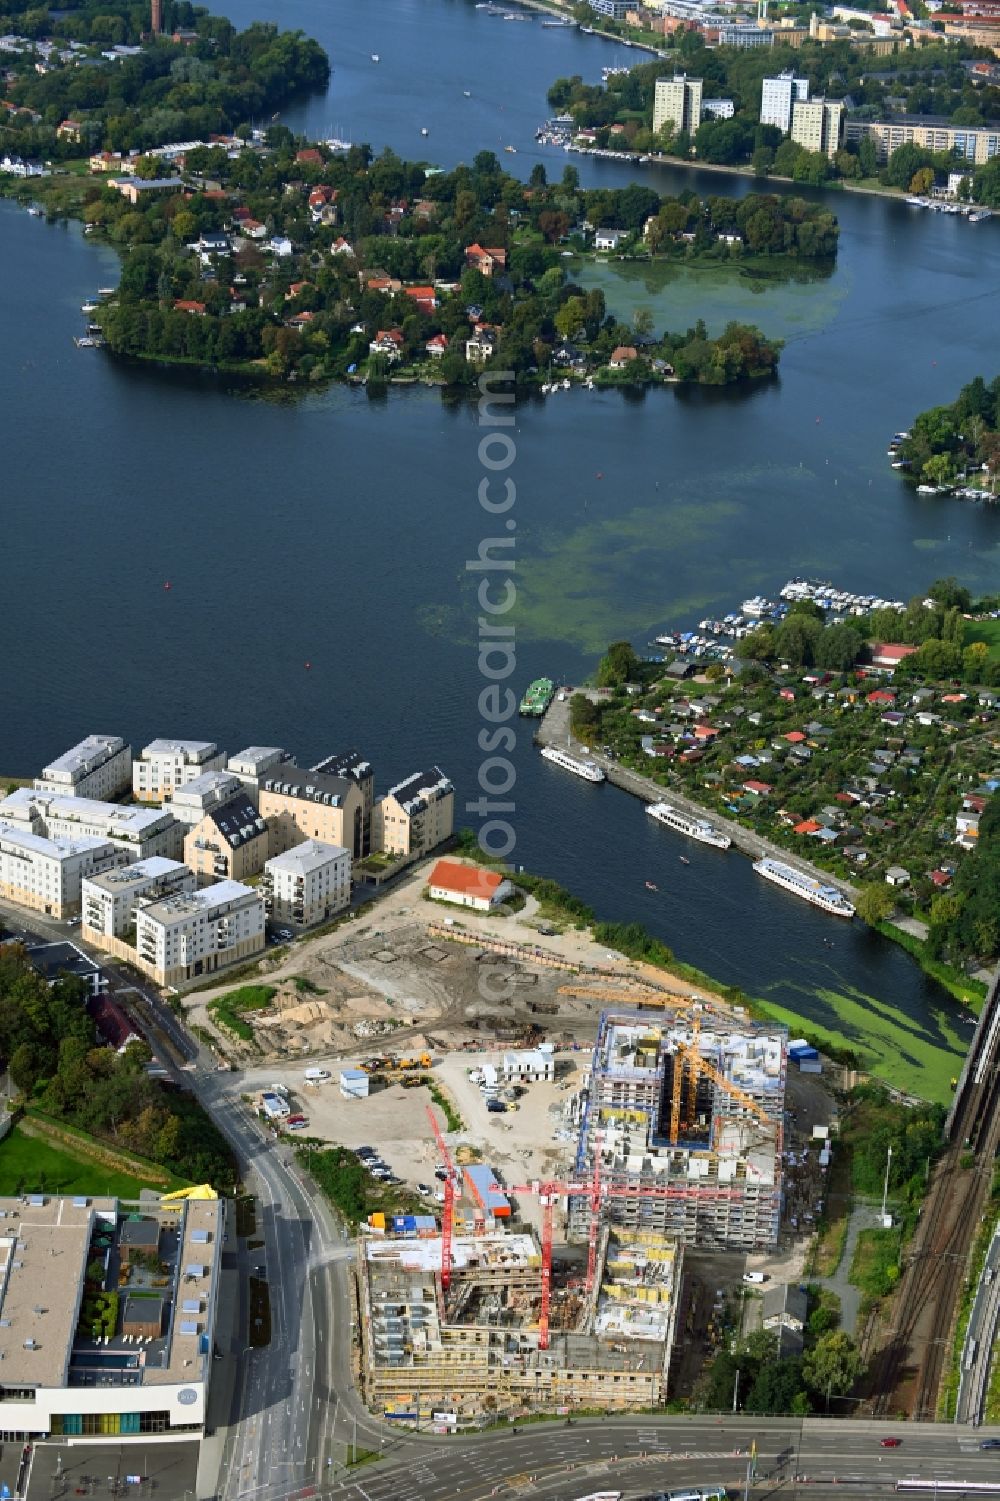 Potsdam from above - Construction site for a new residential and hotel building Havel Quartier Potsdam - HQP, on the banks of the Havel - Leipziger Strasse in the city center in Potsdam in the state Brandenburg, Germany